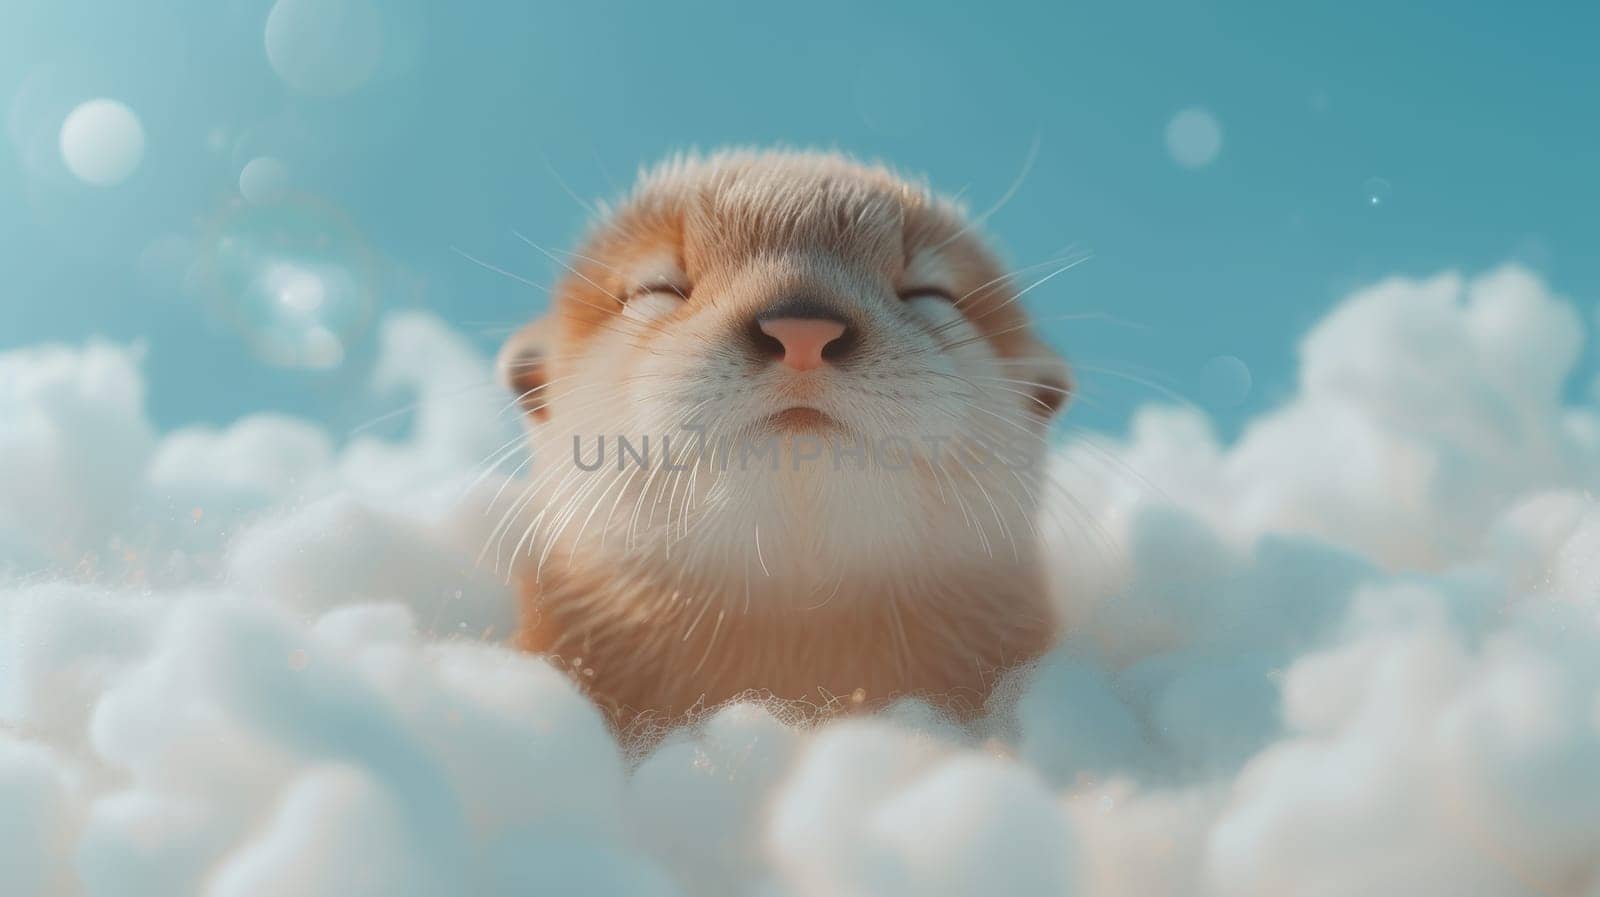 A close up of a small animal in the clouds